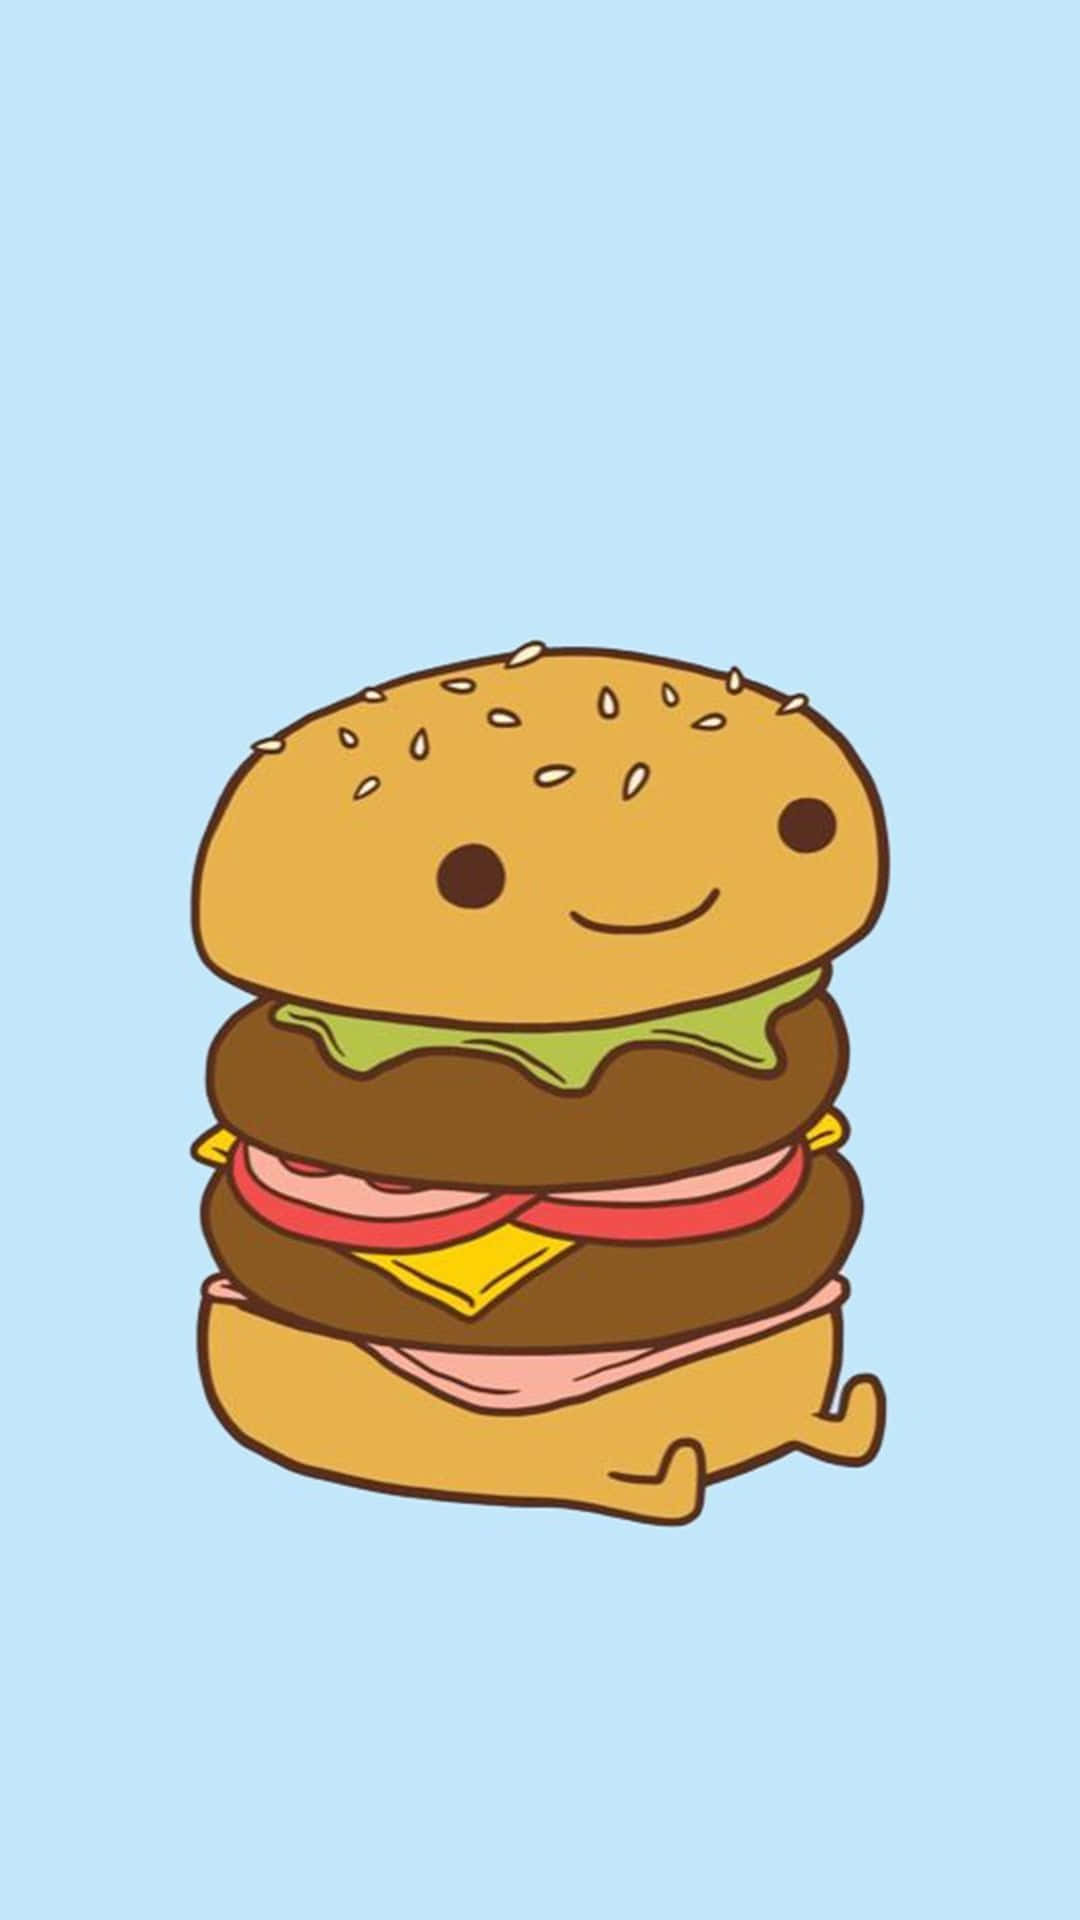 A Hamburger With A Smile On It Wallpaper